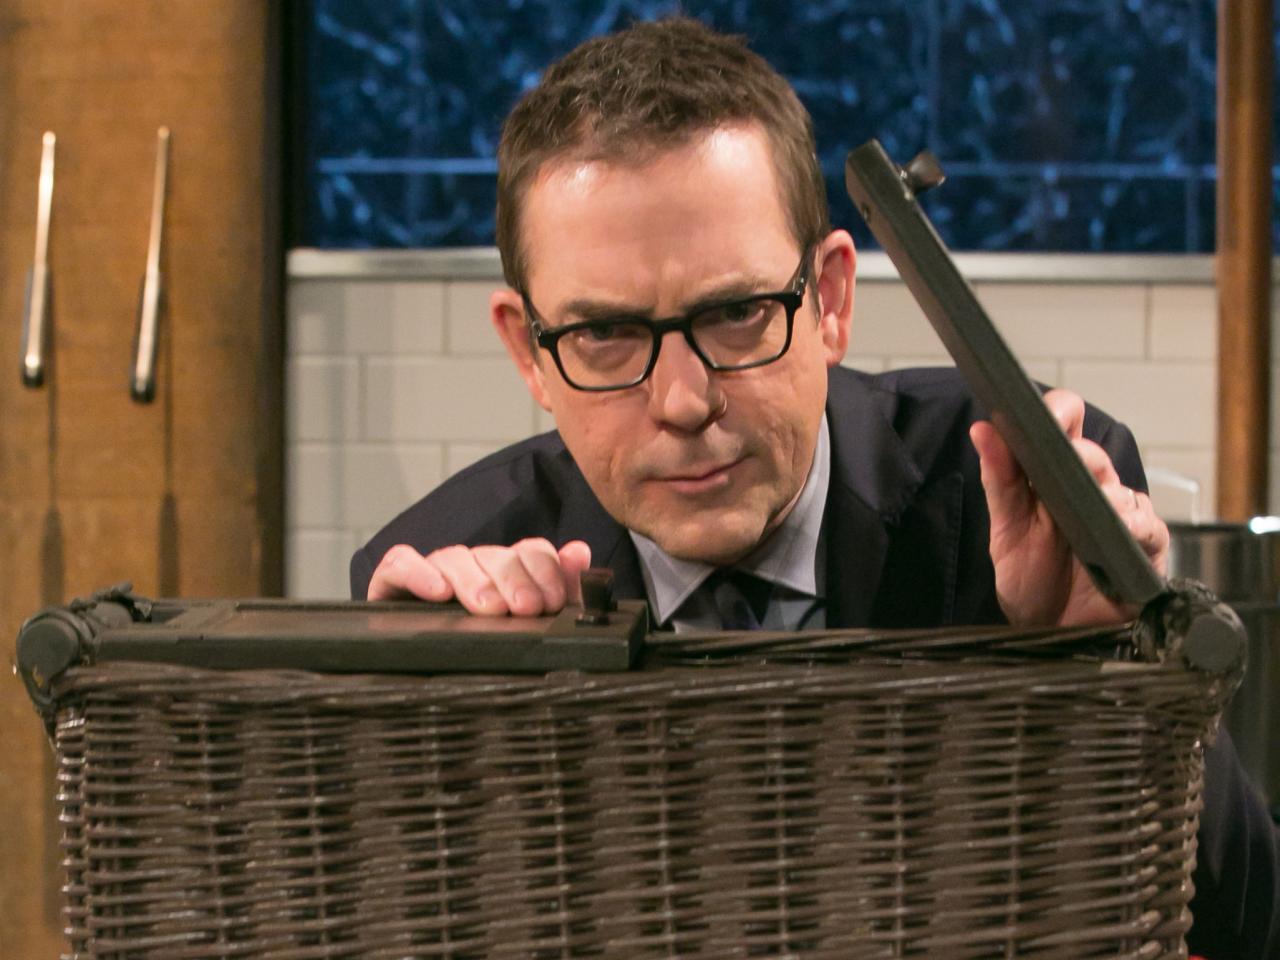 Ted and the Mystery Basket